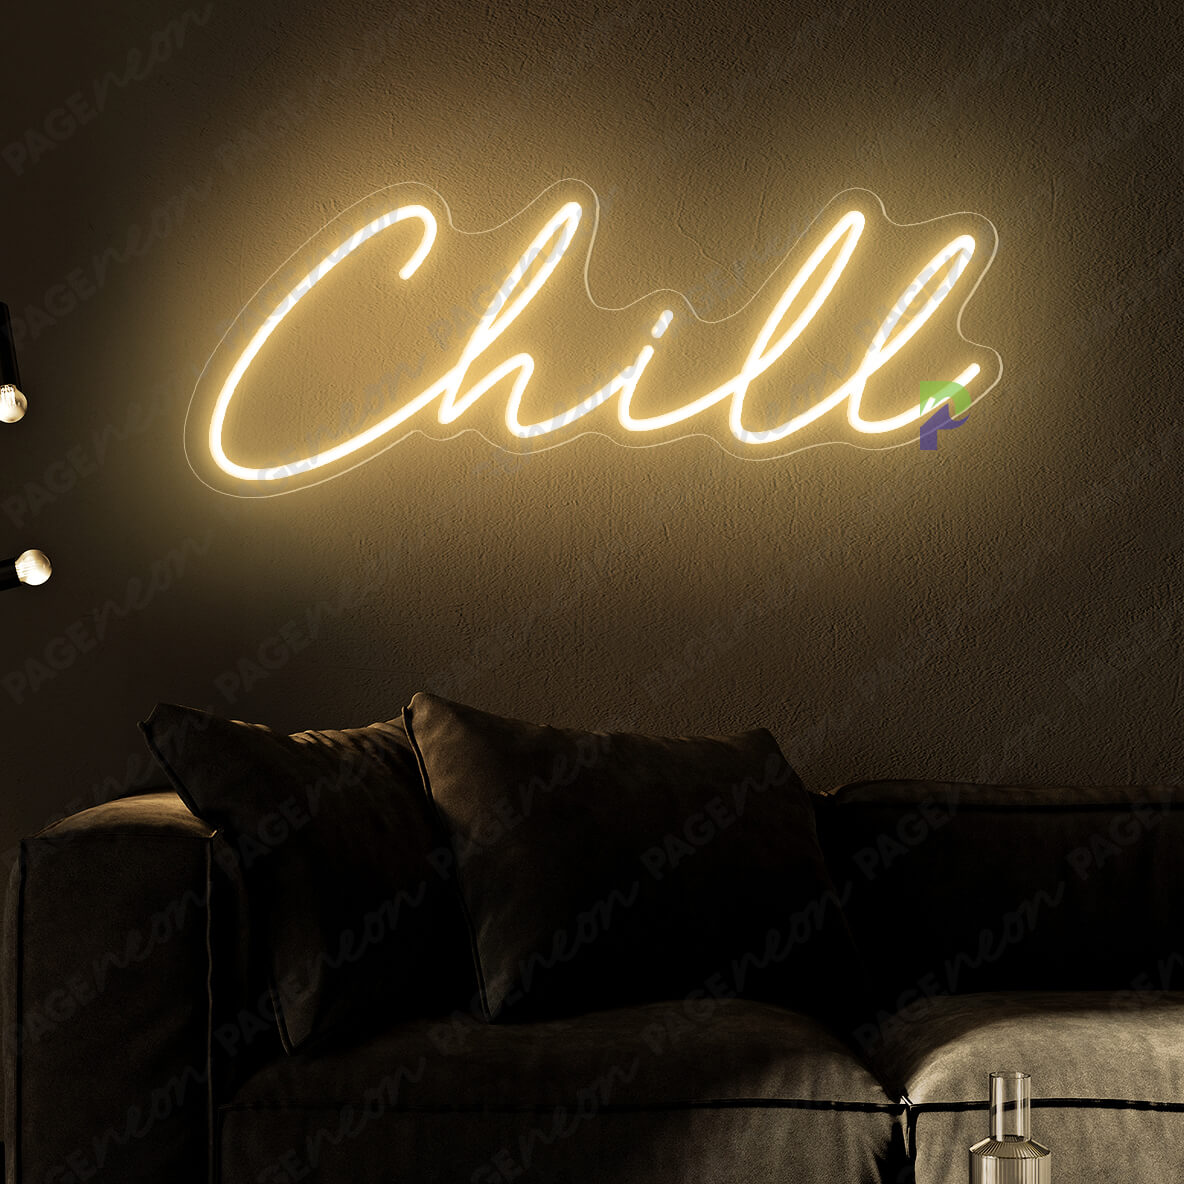 Chill Neon Sign Inspirational Led Light Gold Yellow